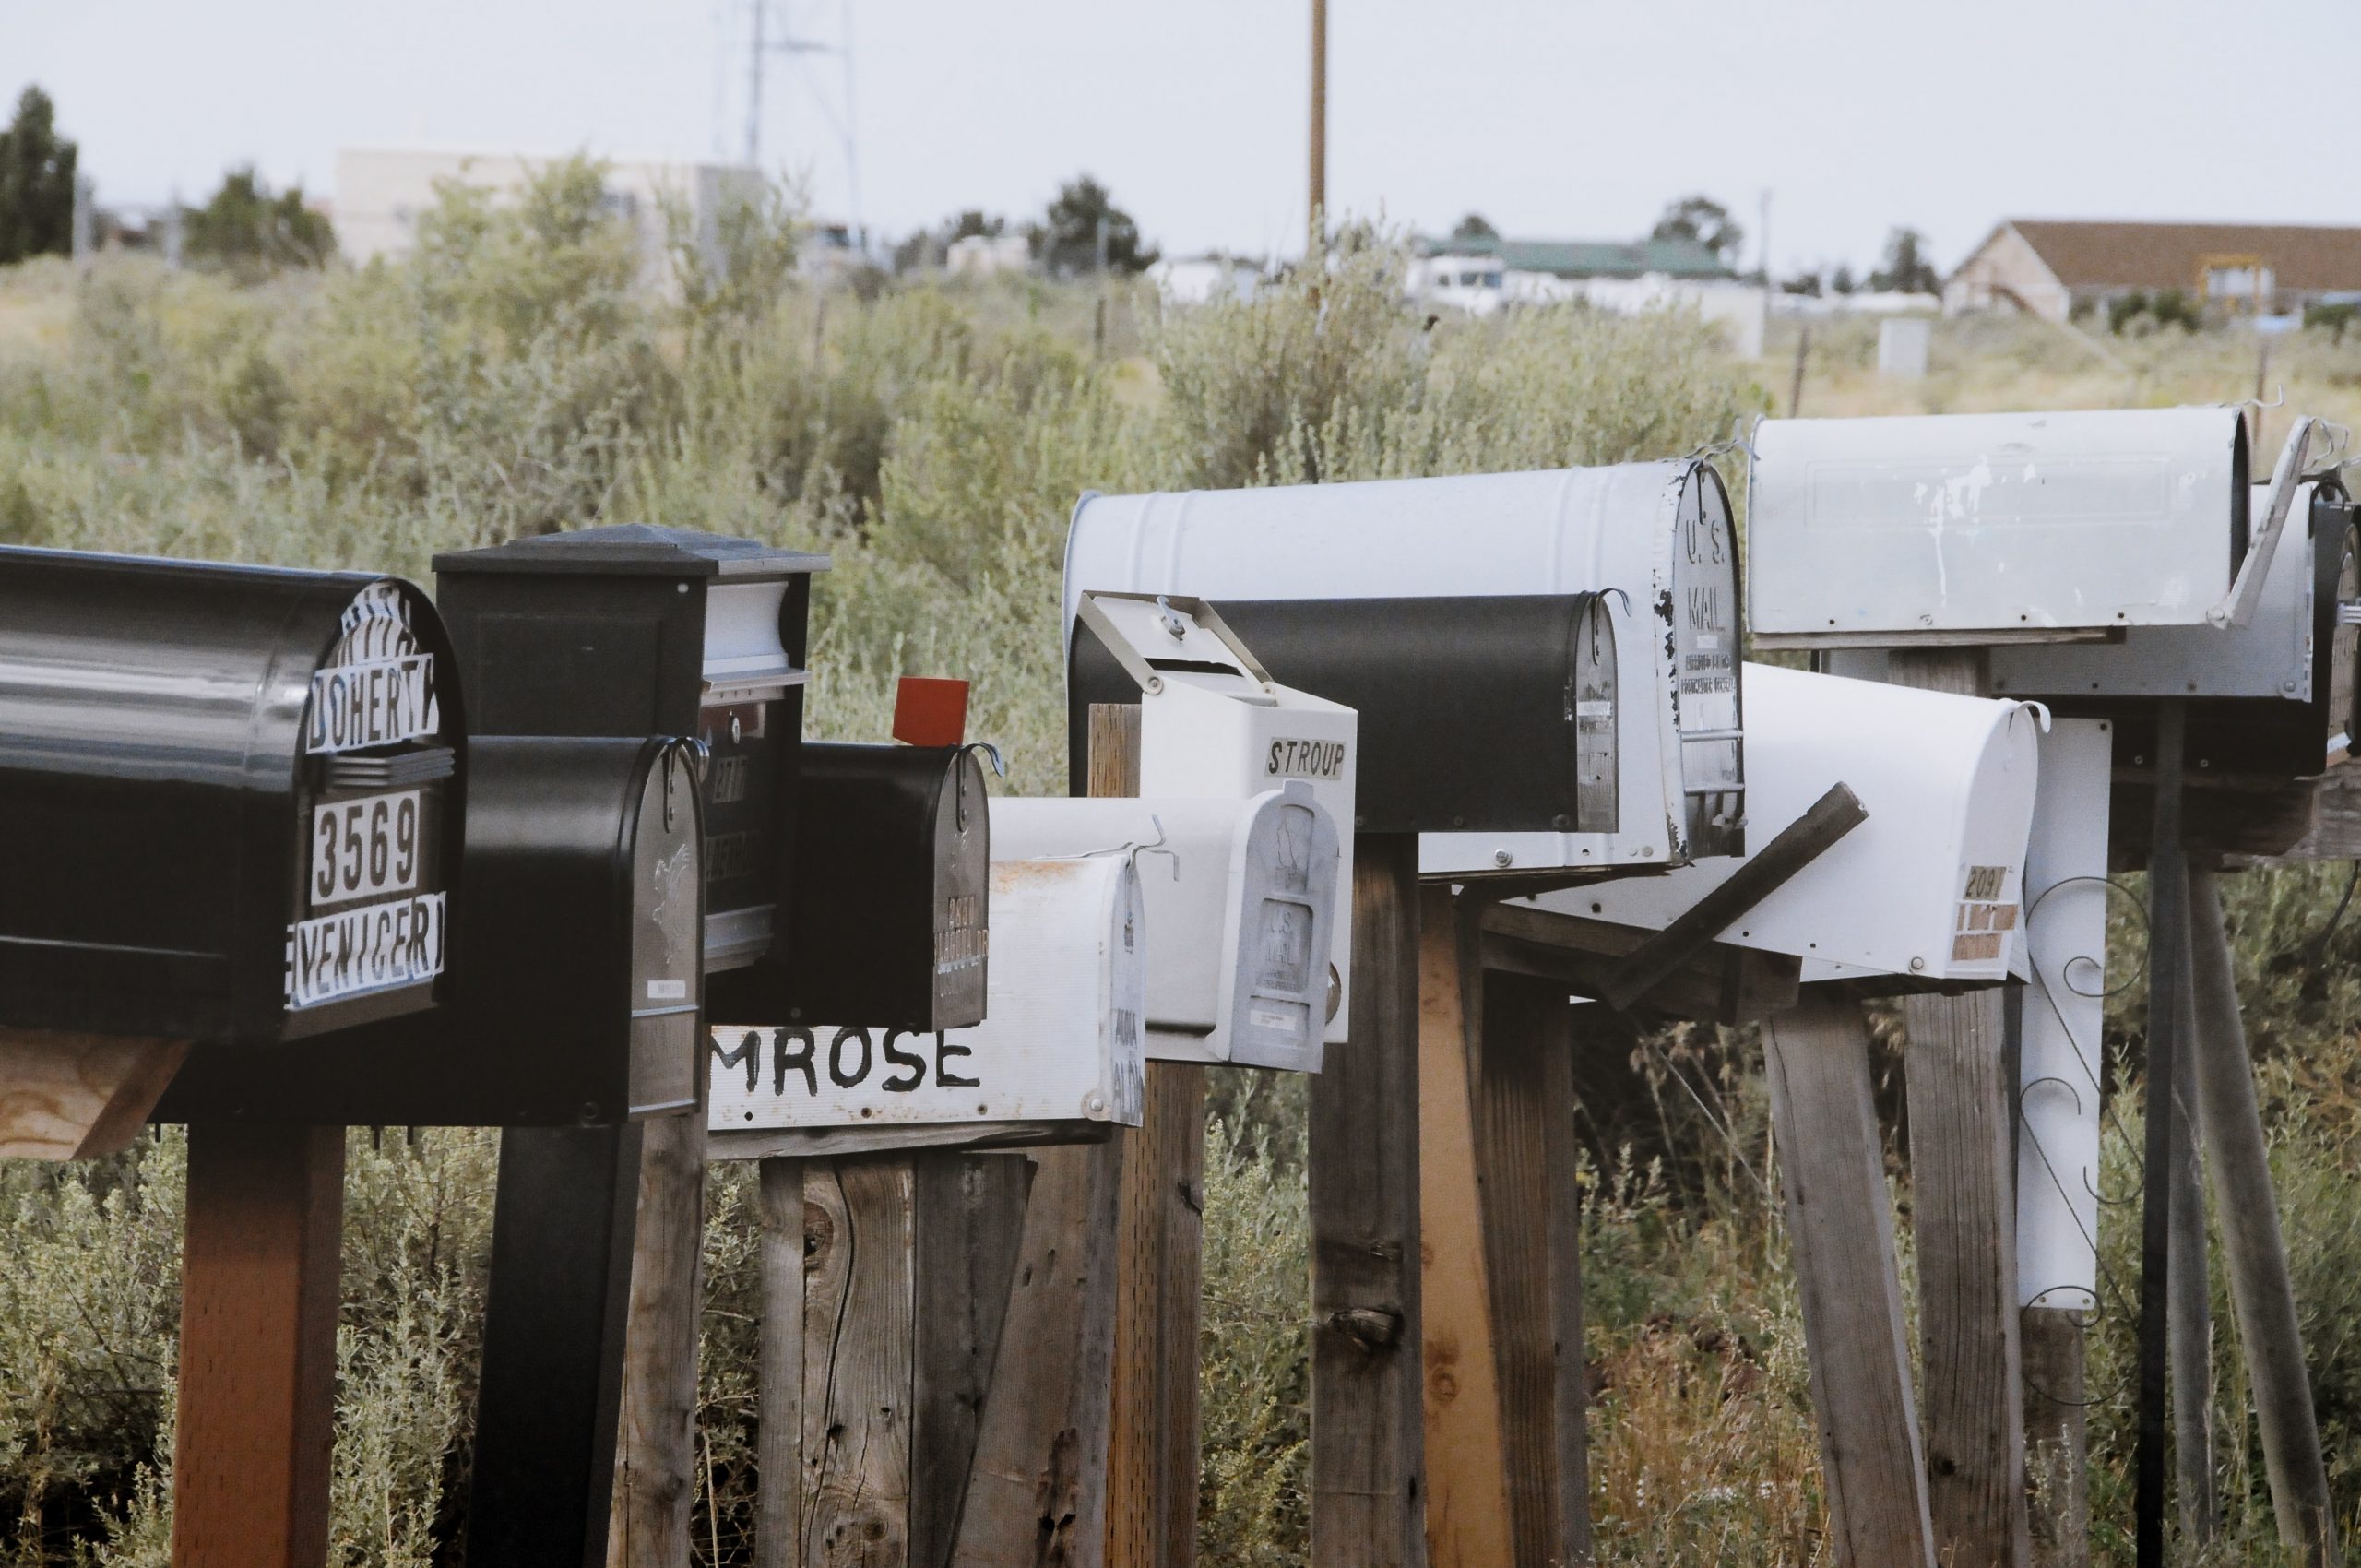 example of physical mailboxes